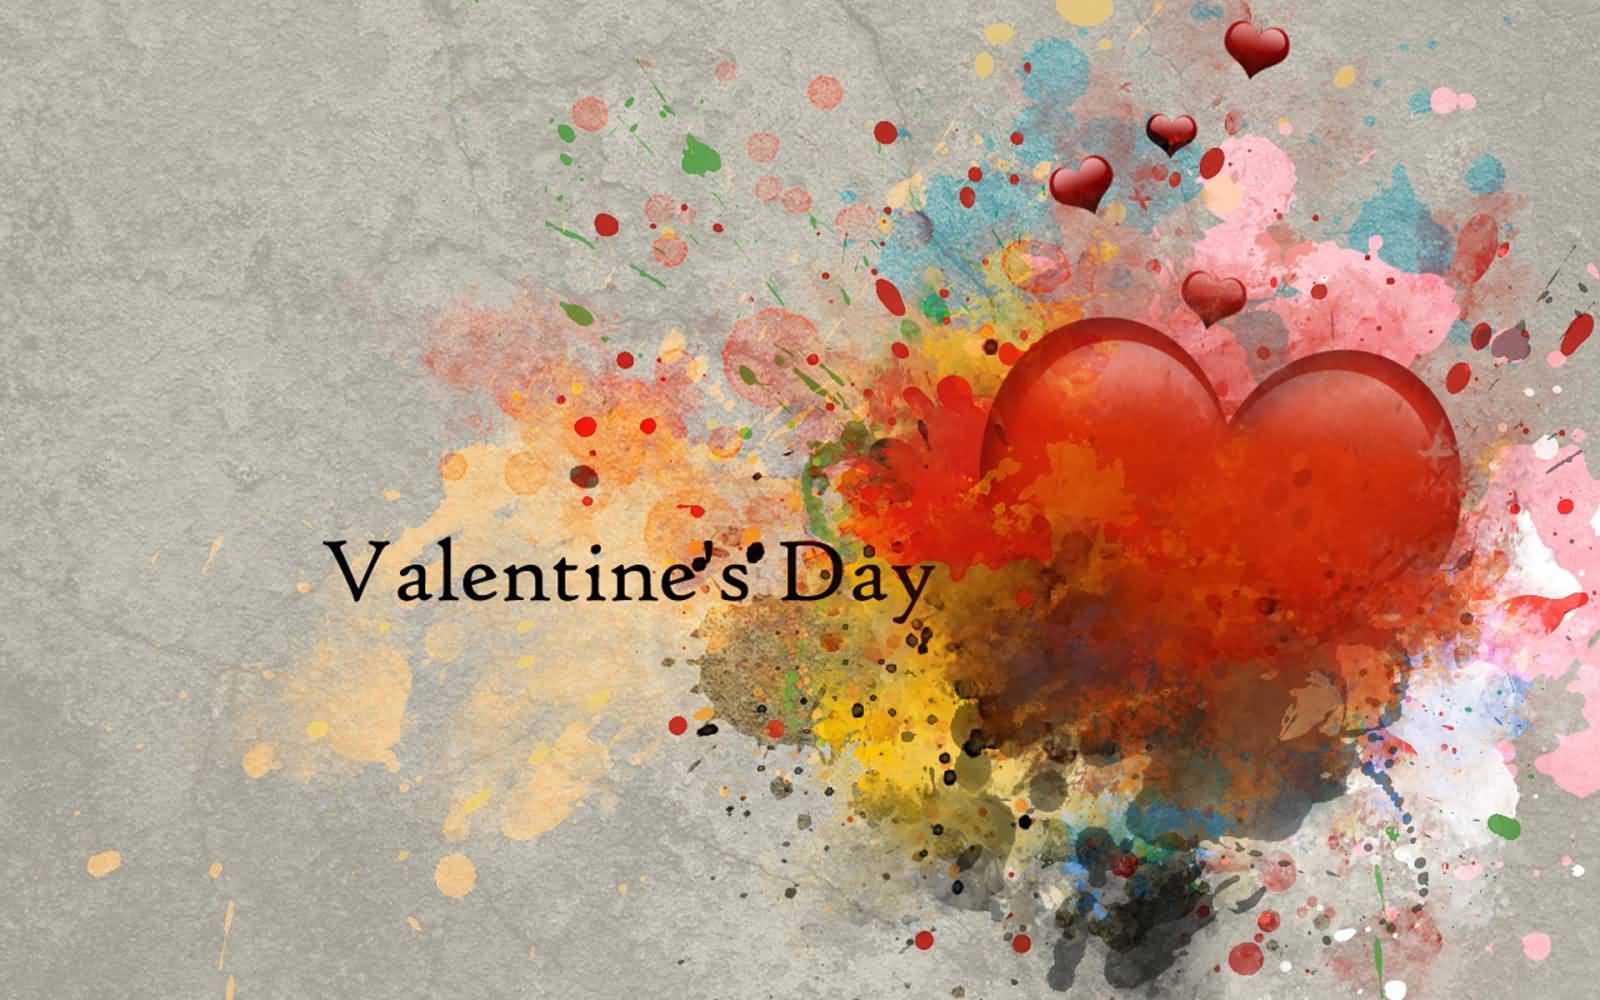 Valentine's Day Hearts Painting Wallpaper